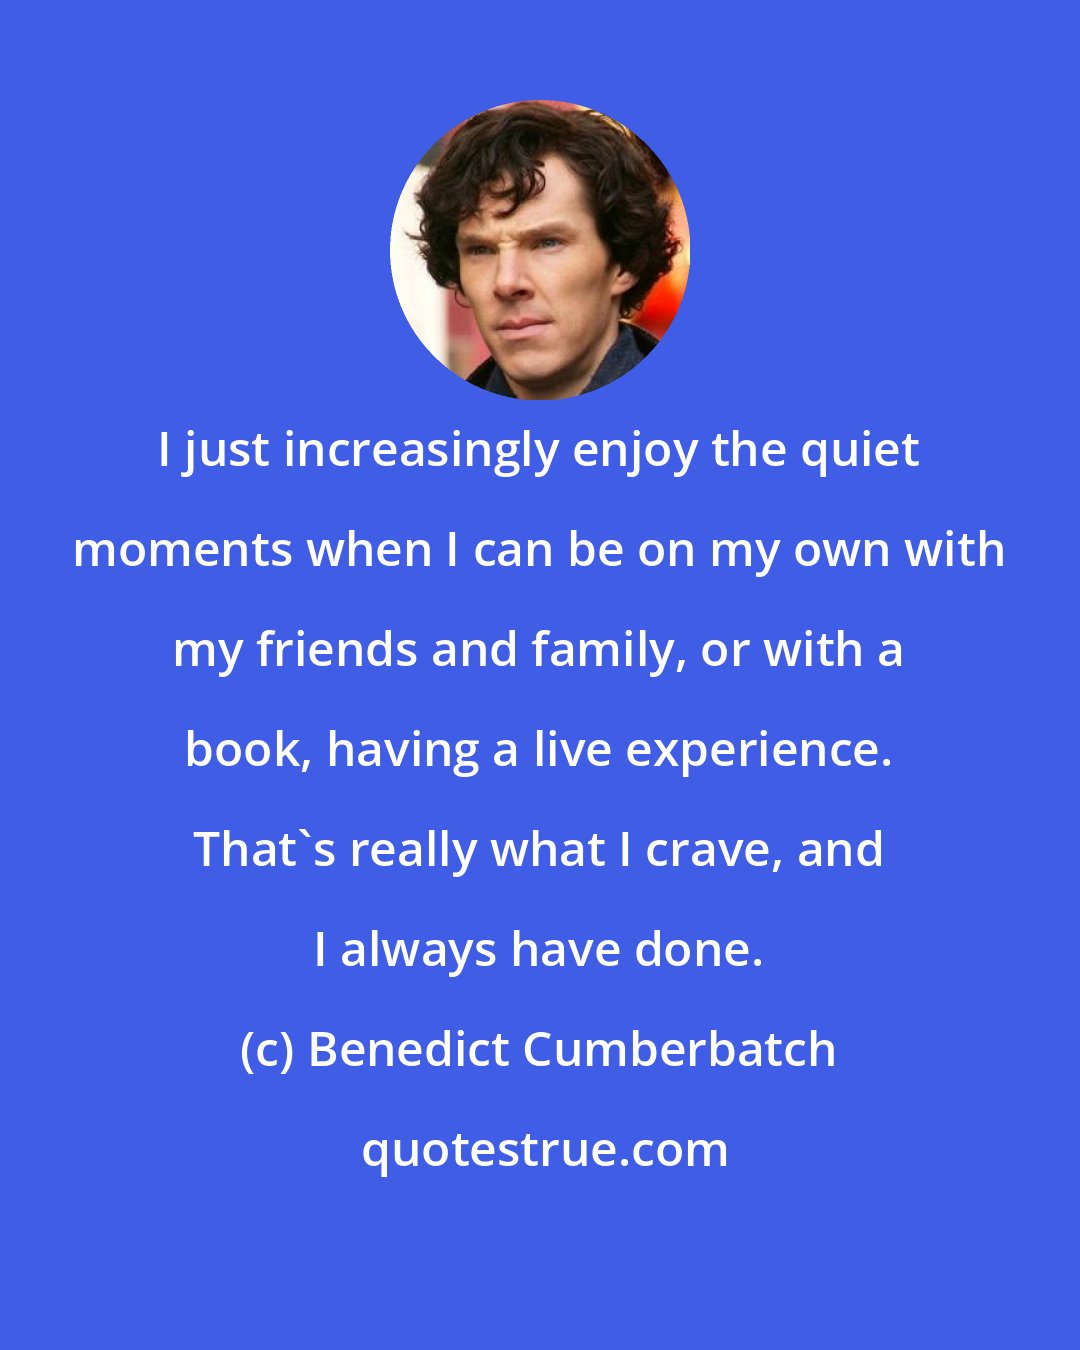 Benedict Cumberbatch: I just increasingly enjoy the quiet moments when I can be on my own with my friends and family, or with a book, having a live experience. That's really what I crave, and I always have done.